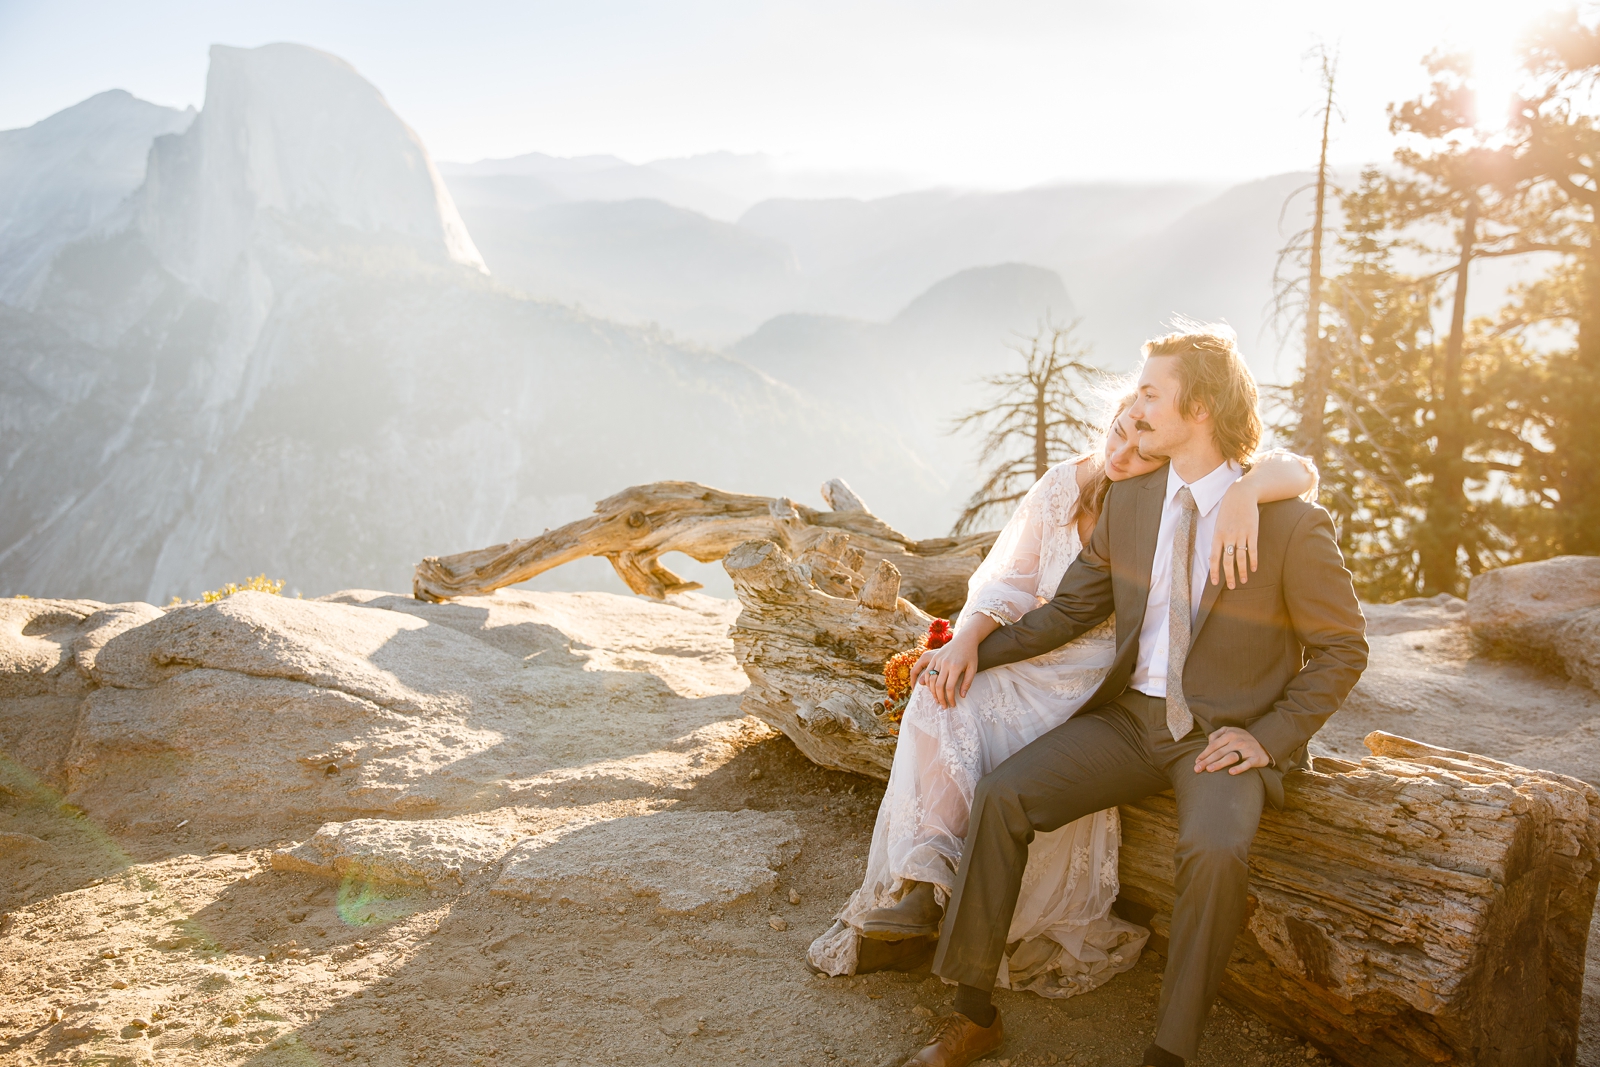 Bride and groom sharing a quiet moment in Yosemite.